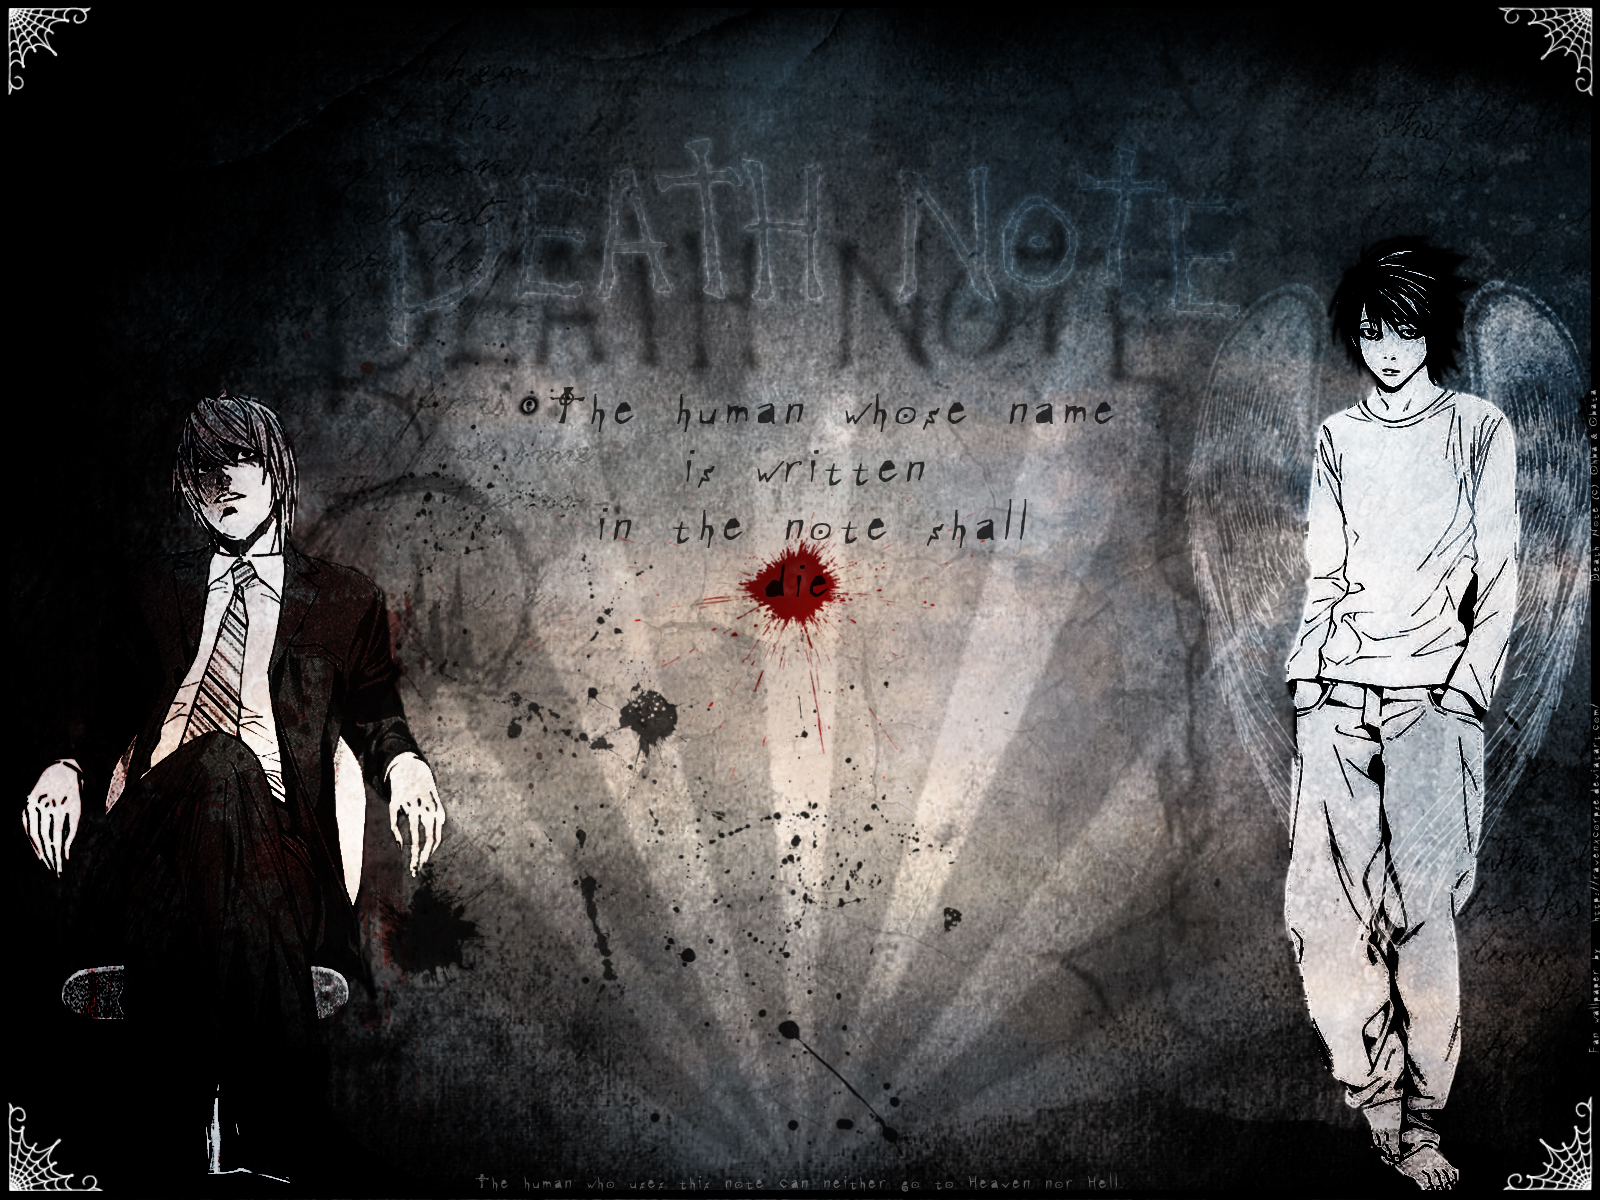 death+note+the+human+whose+name+is+written+in+the+note+shall+die